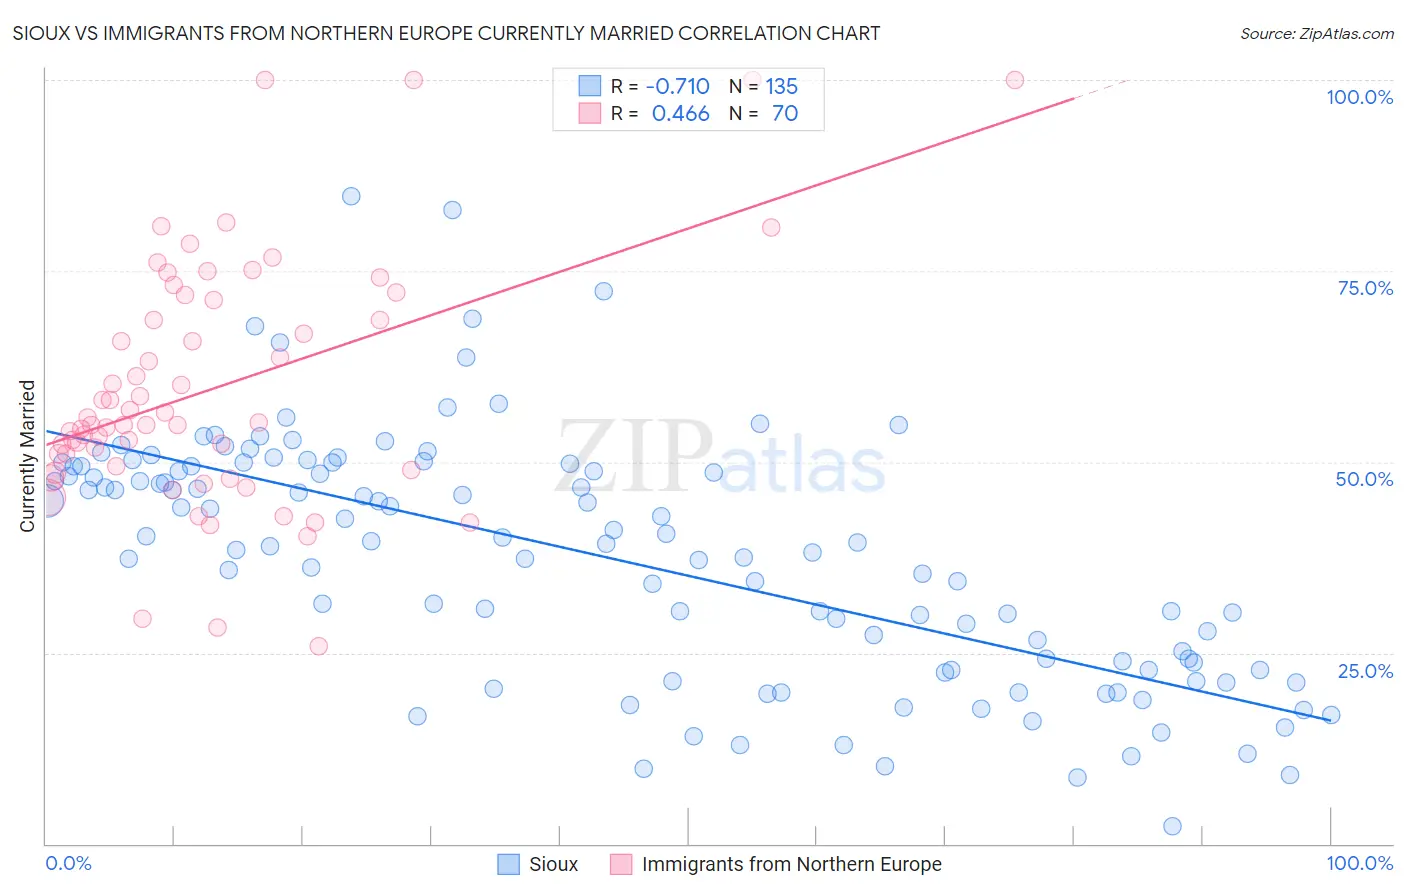 Sioux vs Immigrants from Northern Europe Currently Married